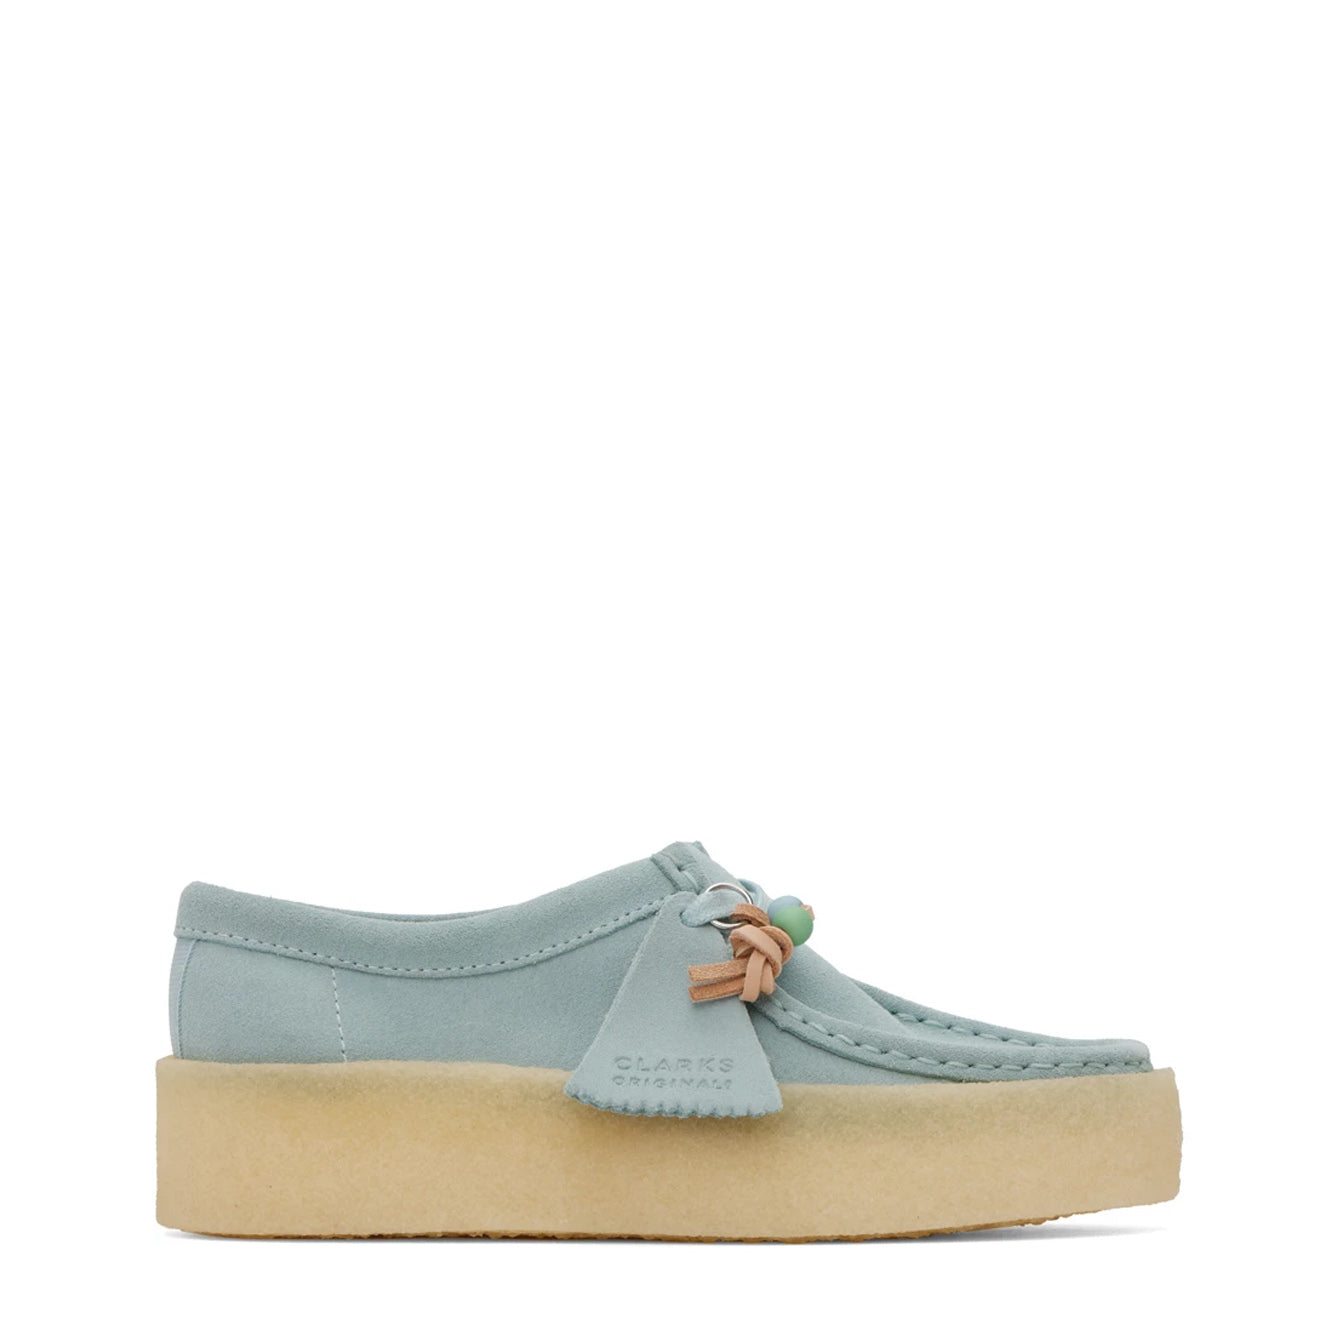 Clarks Originals Womens Wallabee Cup Blue Suede | The Sporting Lodge